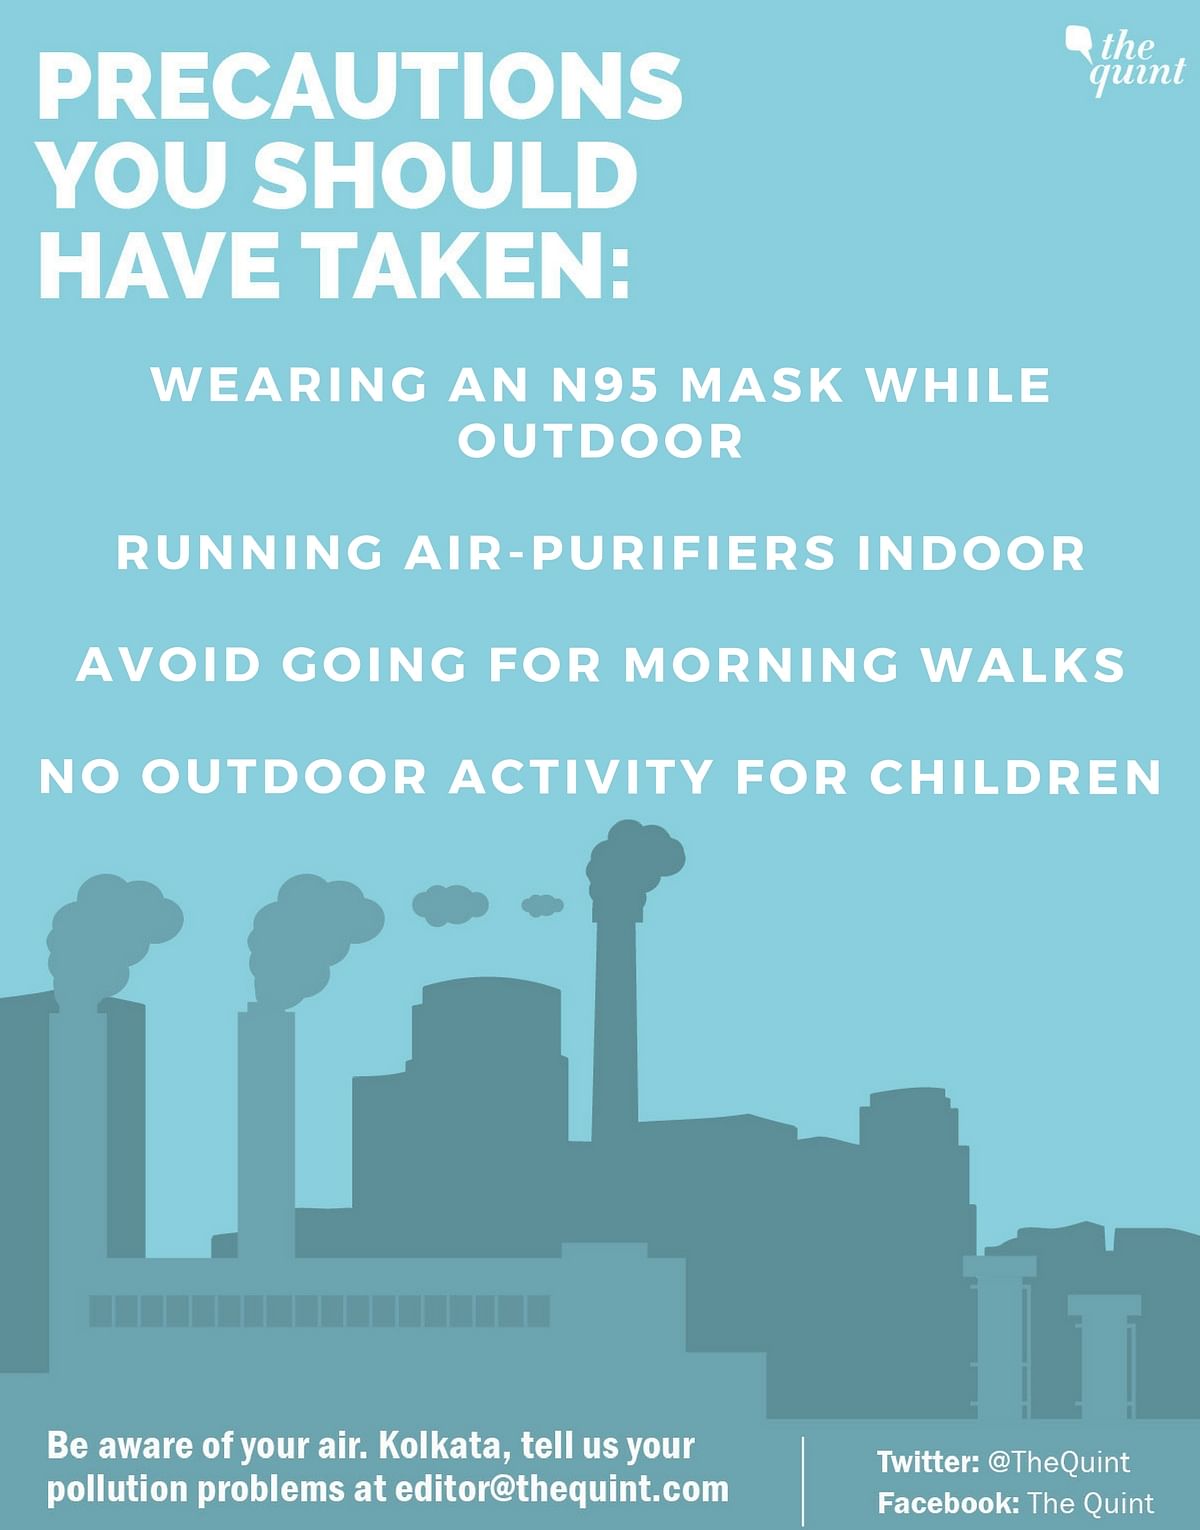 A daily update on the city’s pollution levels. So that you can go out prepared.